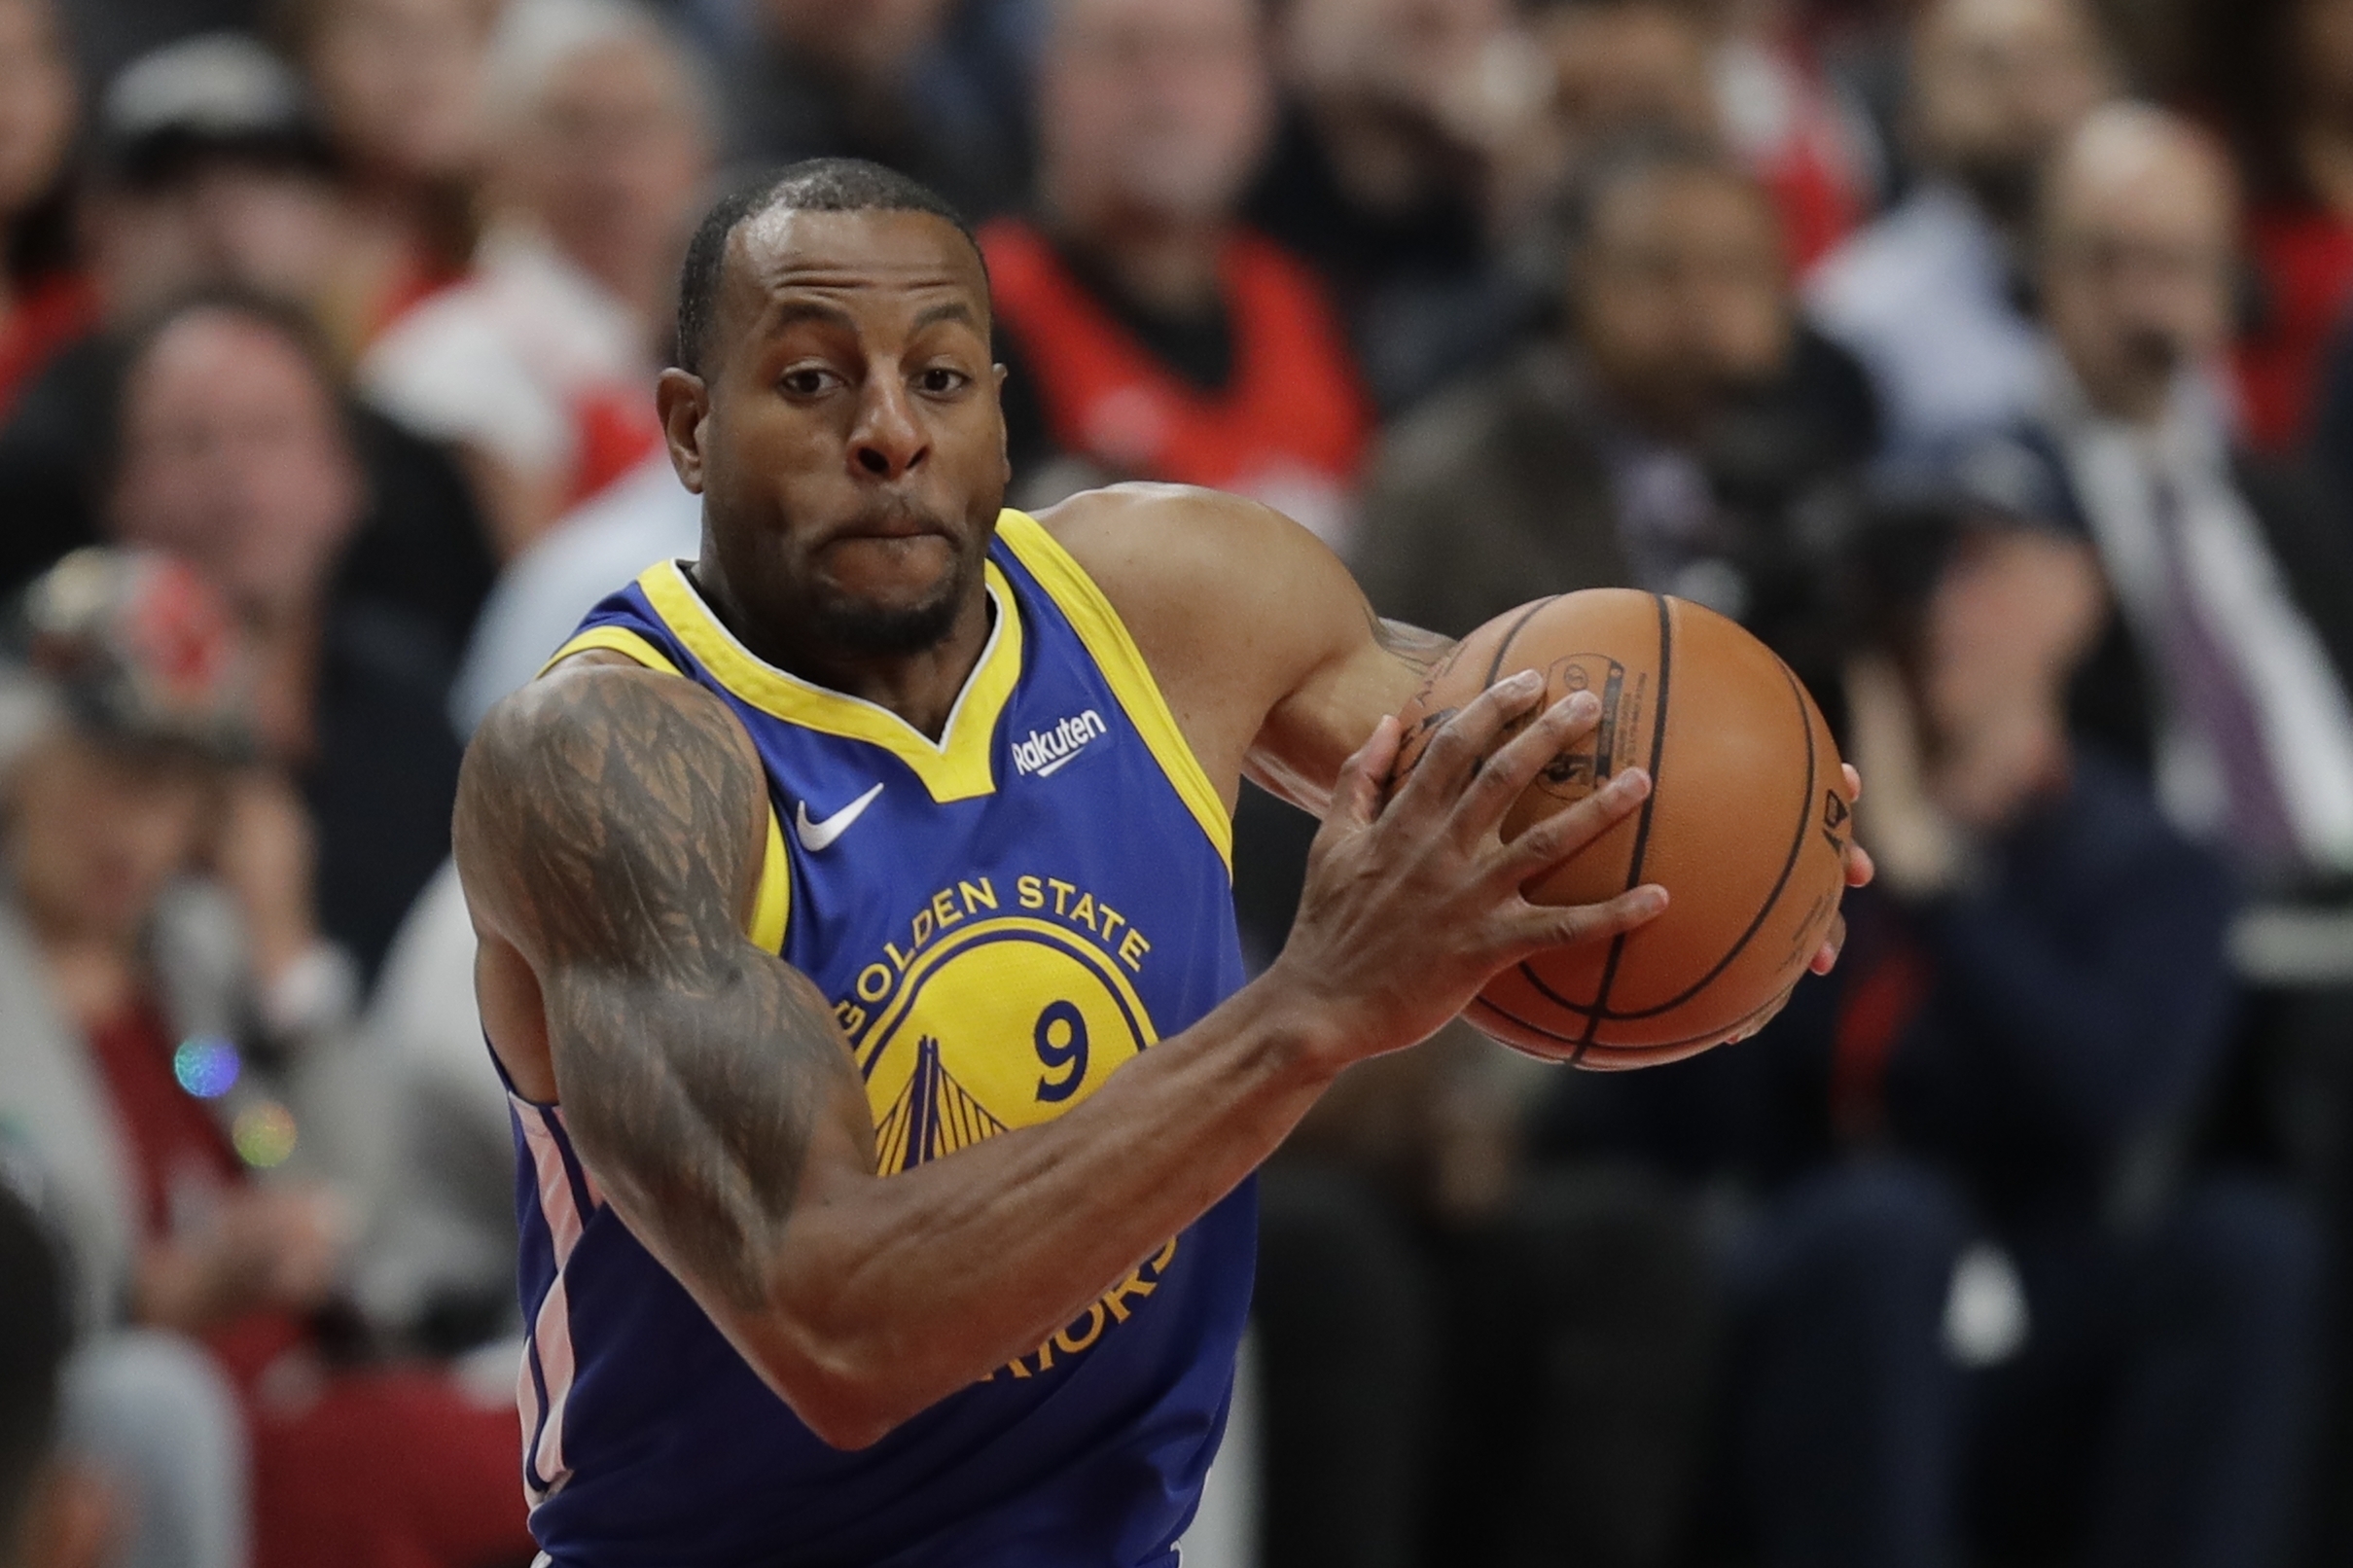 Heat S Pat Riley Praises Elite Andre Iguodala After Trade With Grizzlies Bleacher Report Latest News Videos And Highlights